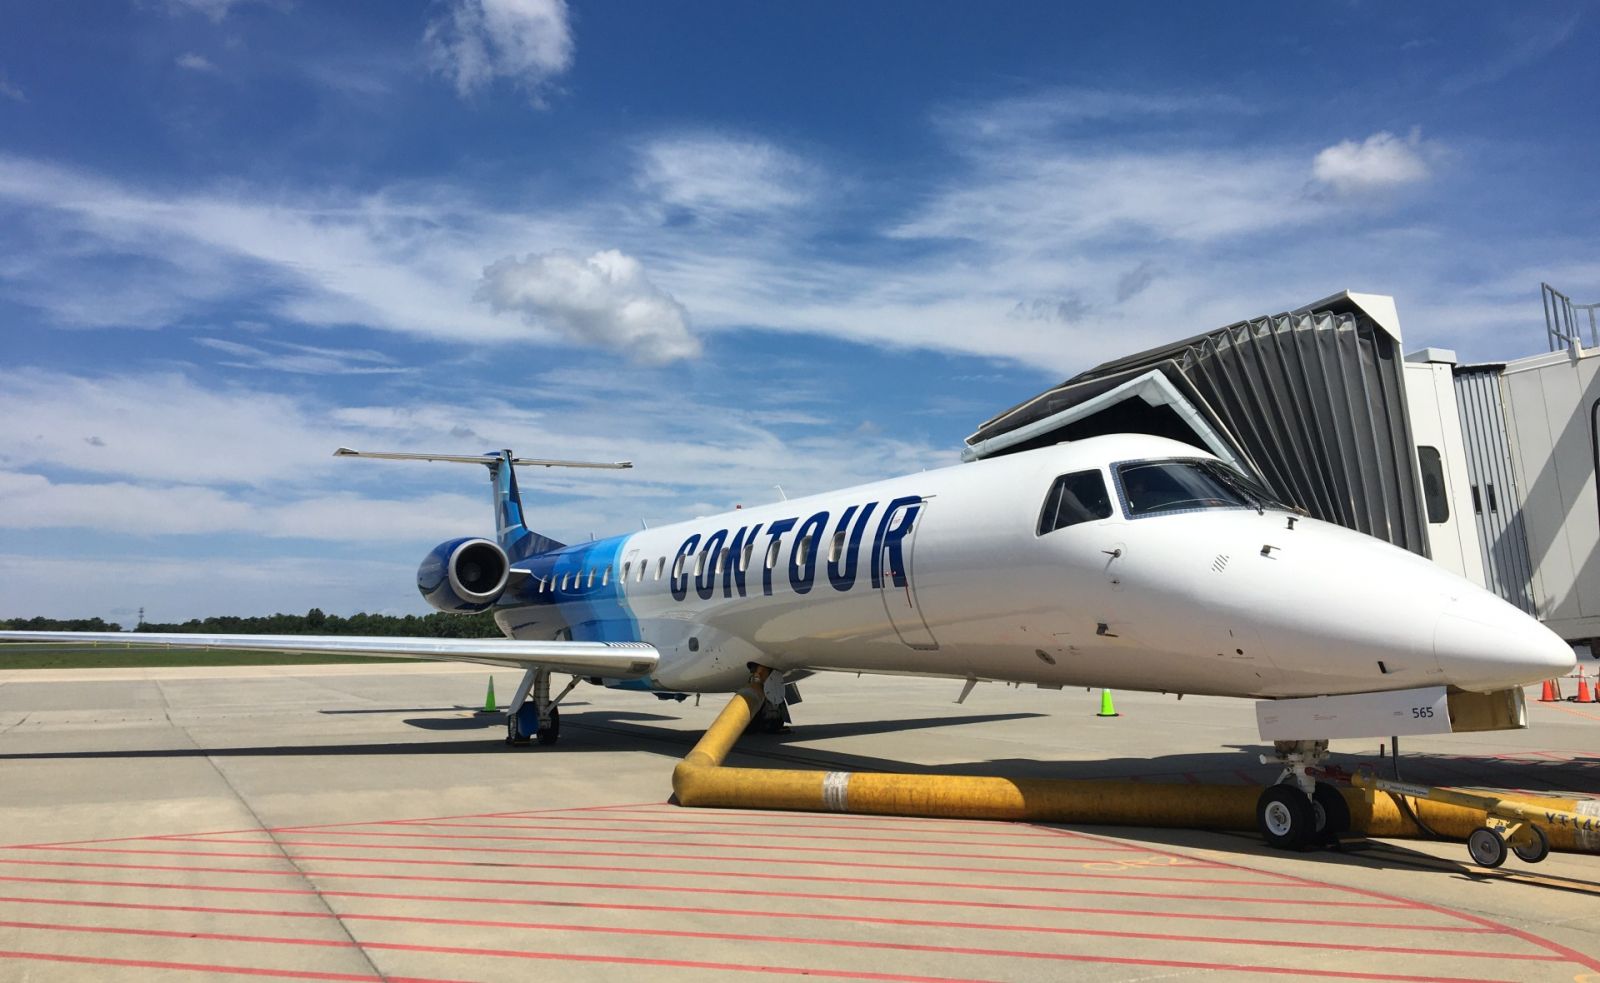 Contour's Embraer ERJ-145 is stopped at GSP's runway in a preview of the airline's nonstop flight to Nashville starting in November. (Photo/Molly Hulsey)